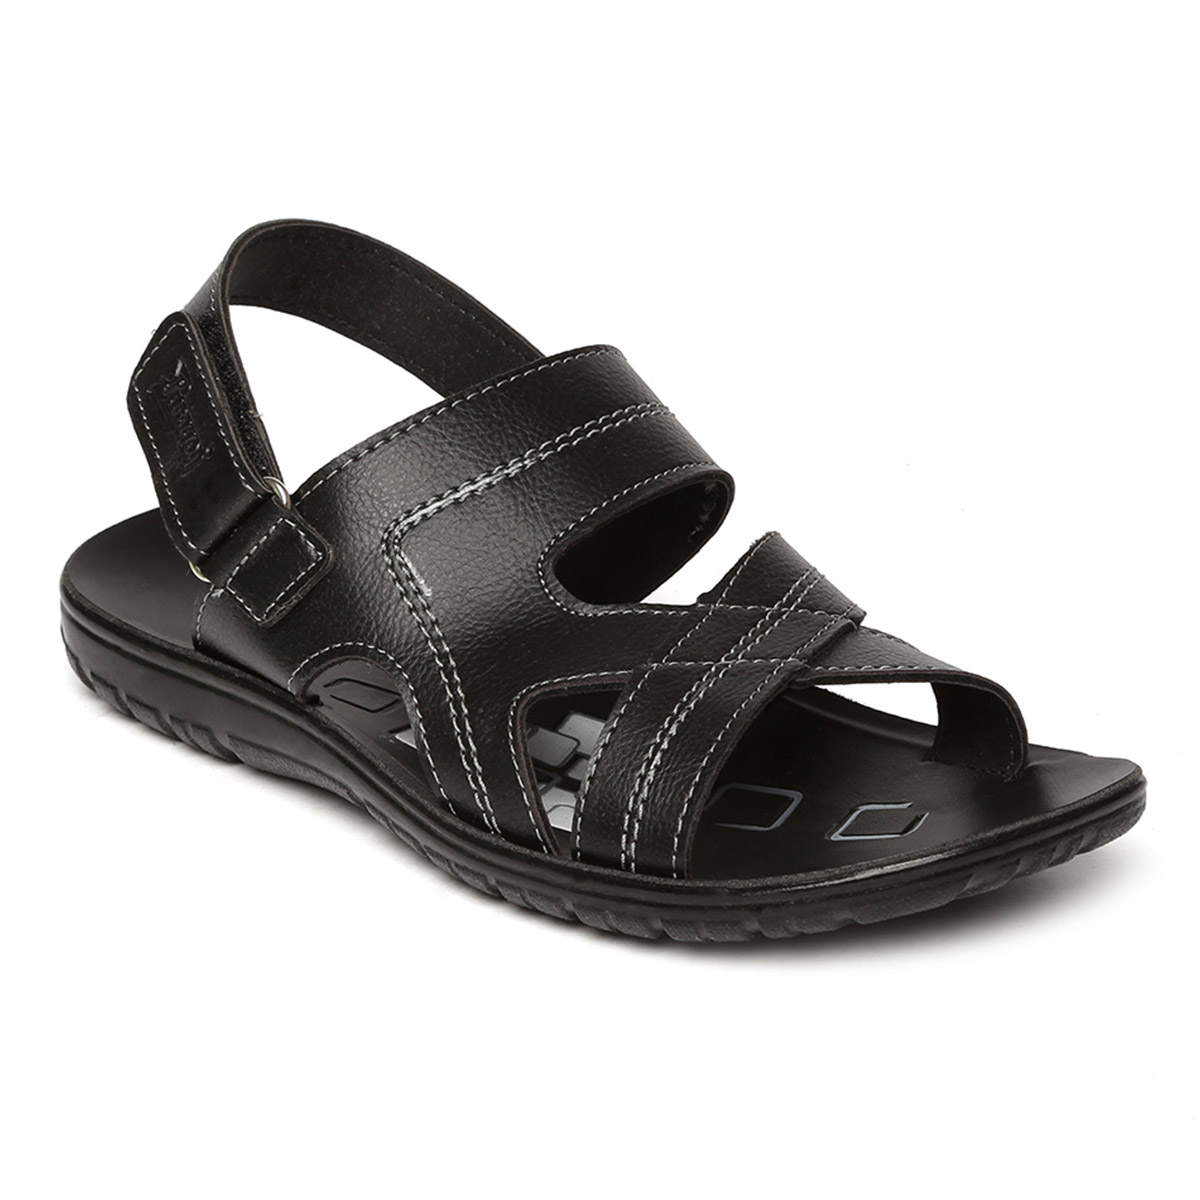 Buy Paragon-Slickers Men's Black Slippers Online @ ₹220 from ShopClues